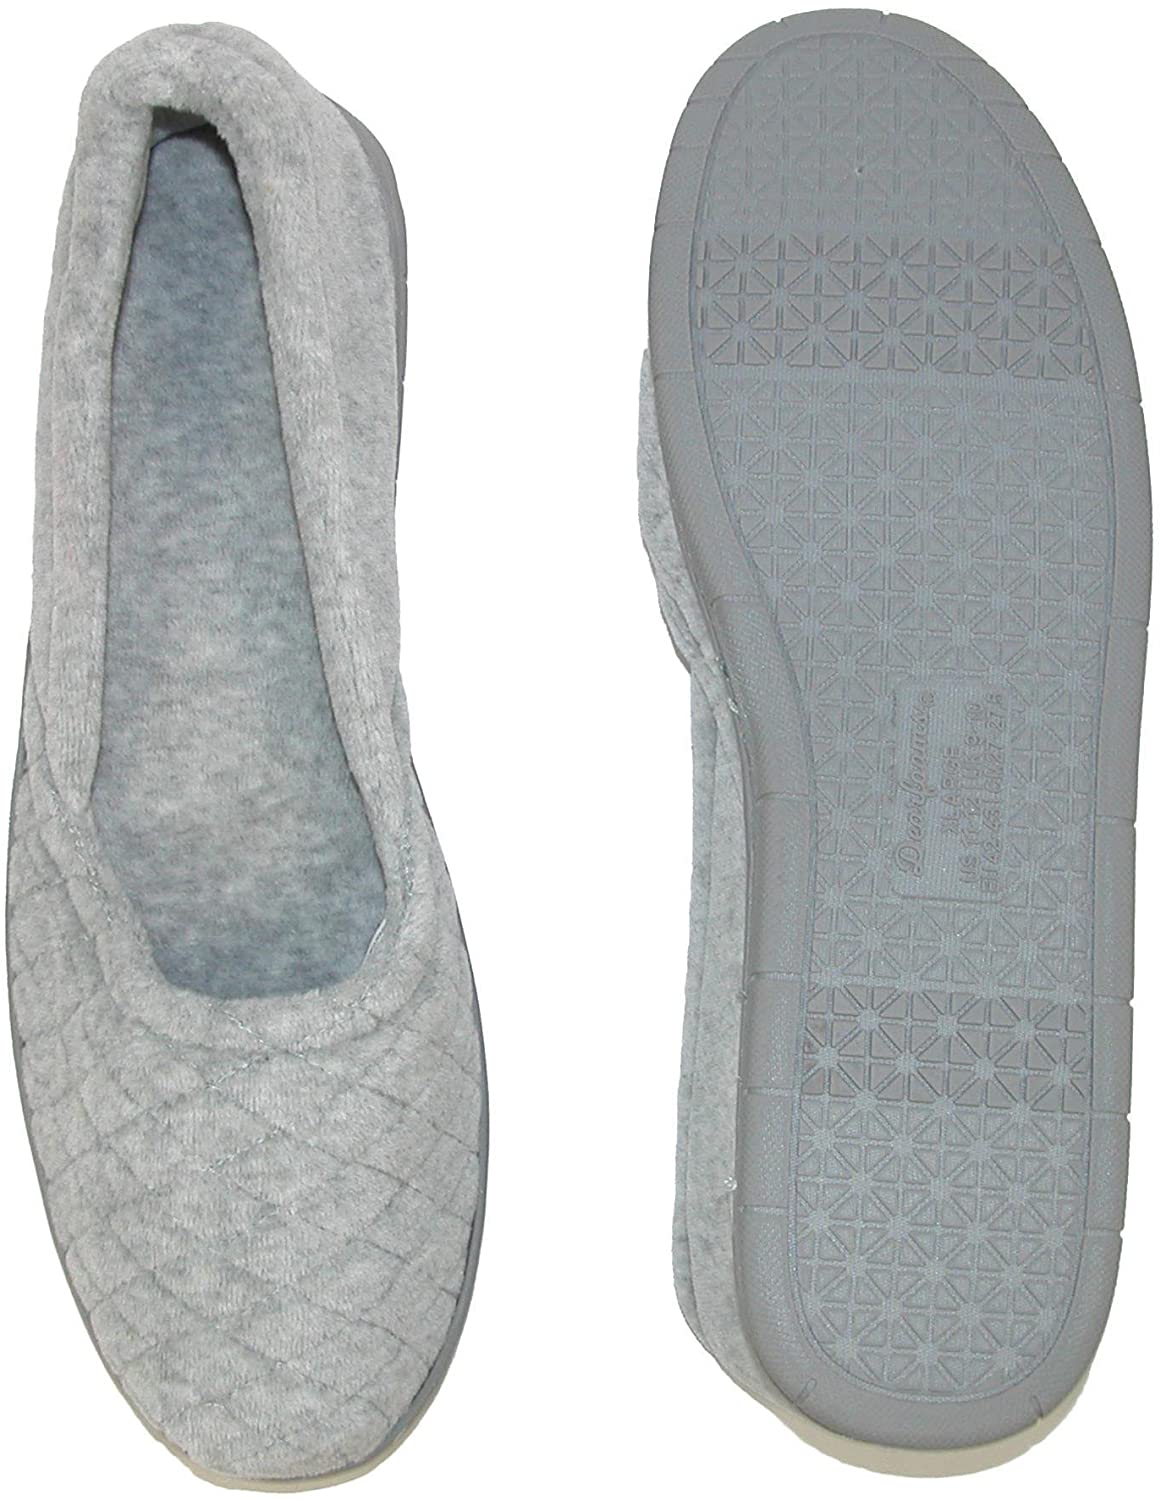 Dearfoams Womens Quilted Microfiber Velour Slippers Color Light Grey Heather